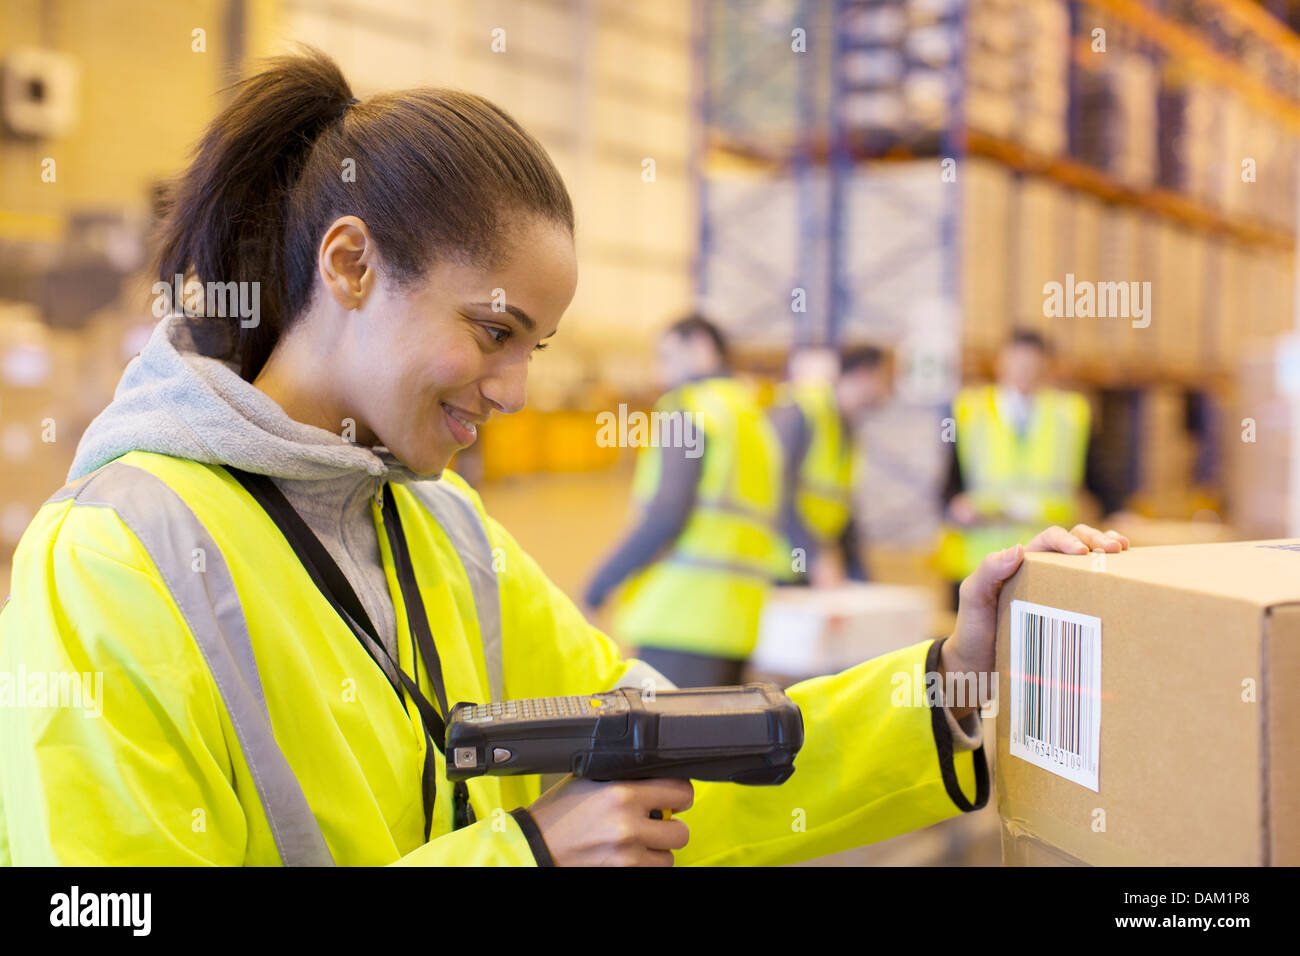 Worker scanning box in warehouse Stock Photo